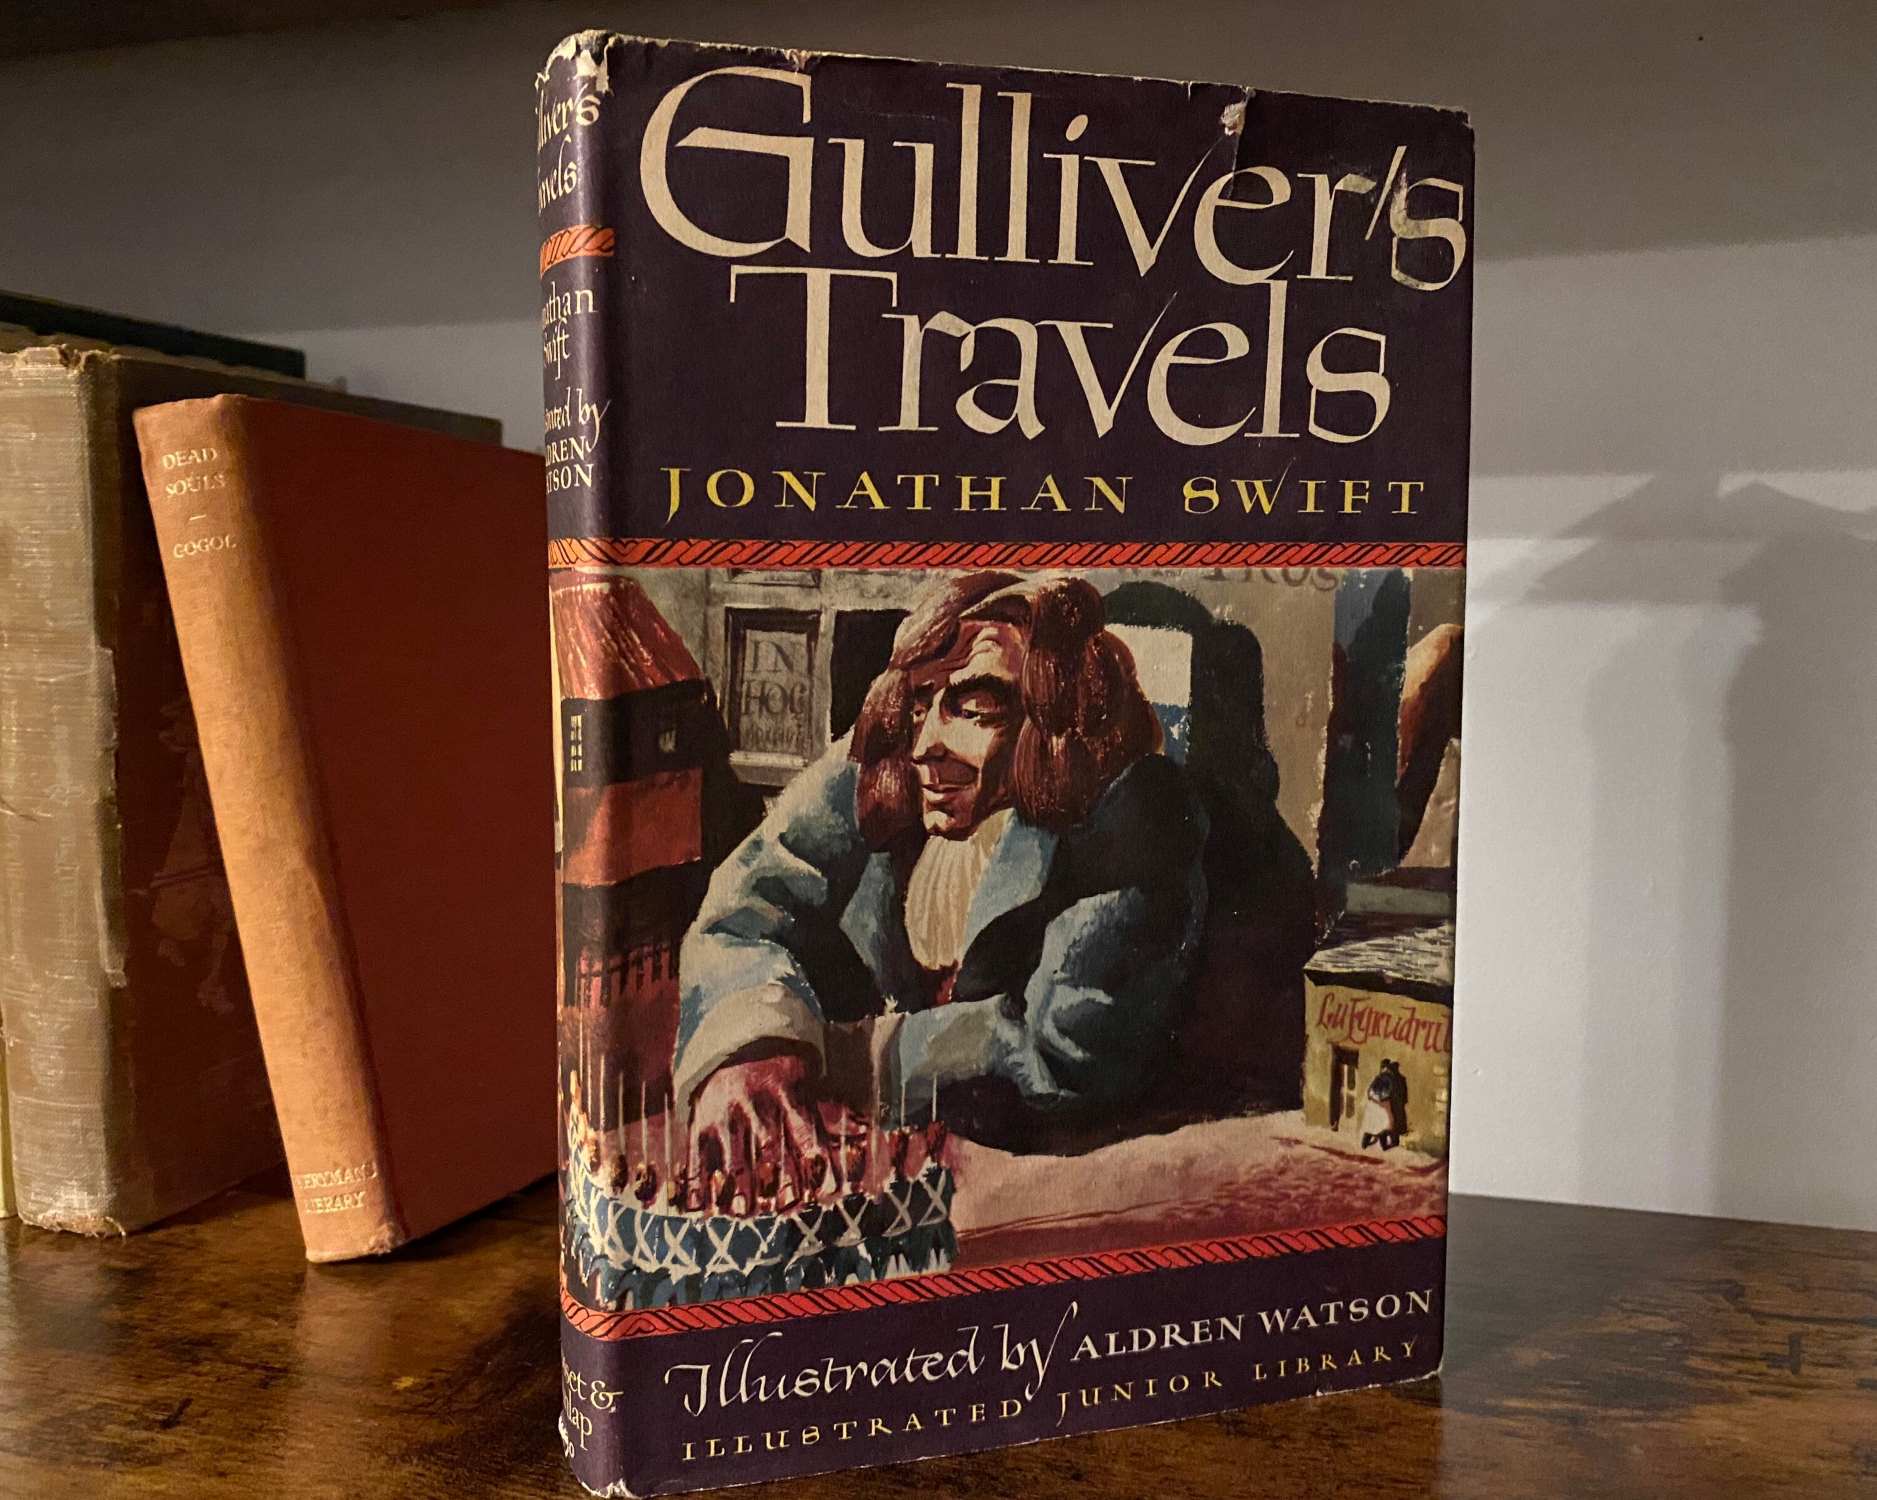 20-mind-blowing-facts-about-gullivers-travels-jonathan-swift